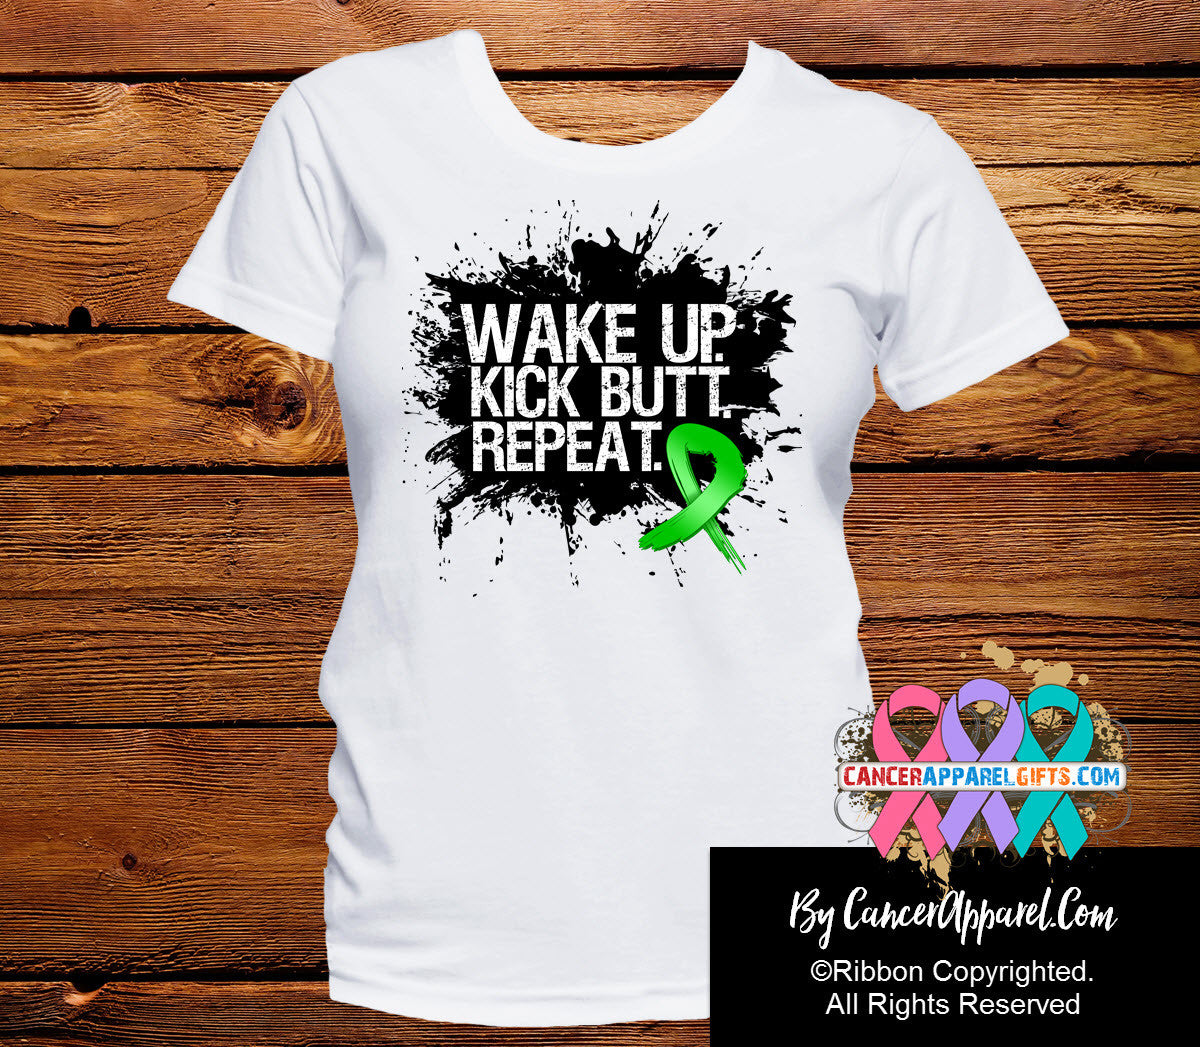 Bile Duct Cancer Shirts Wake Up Kick Butt and Repeat